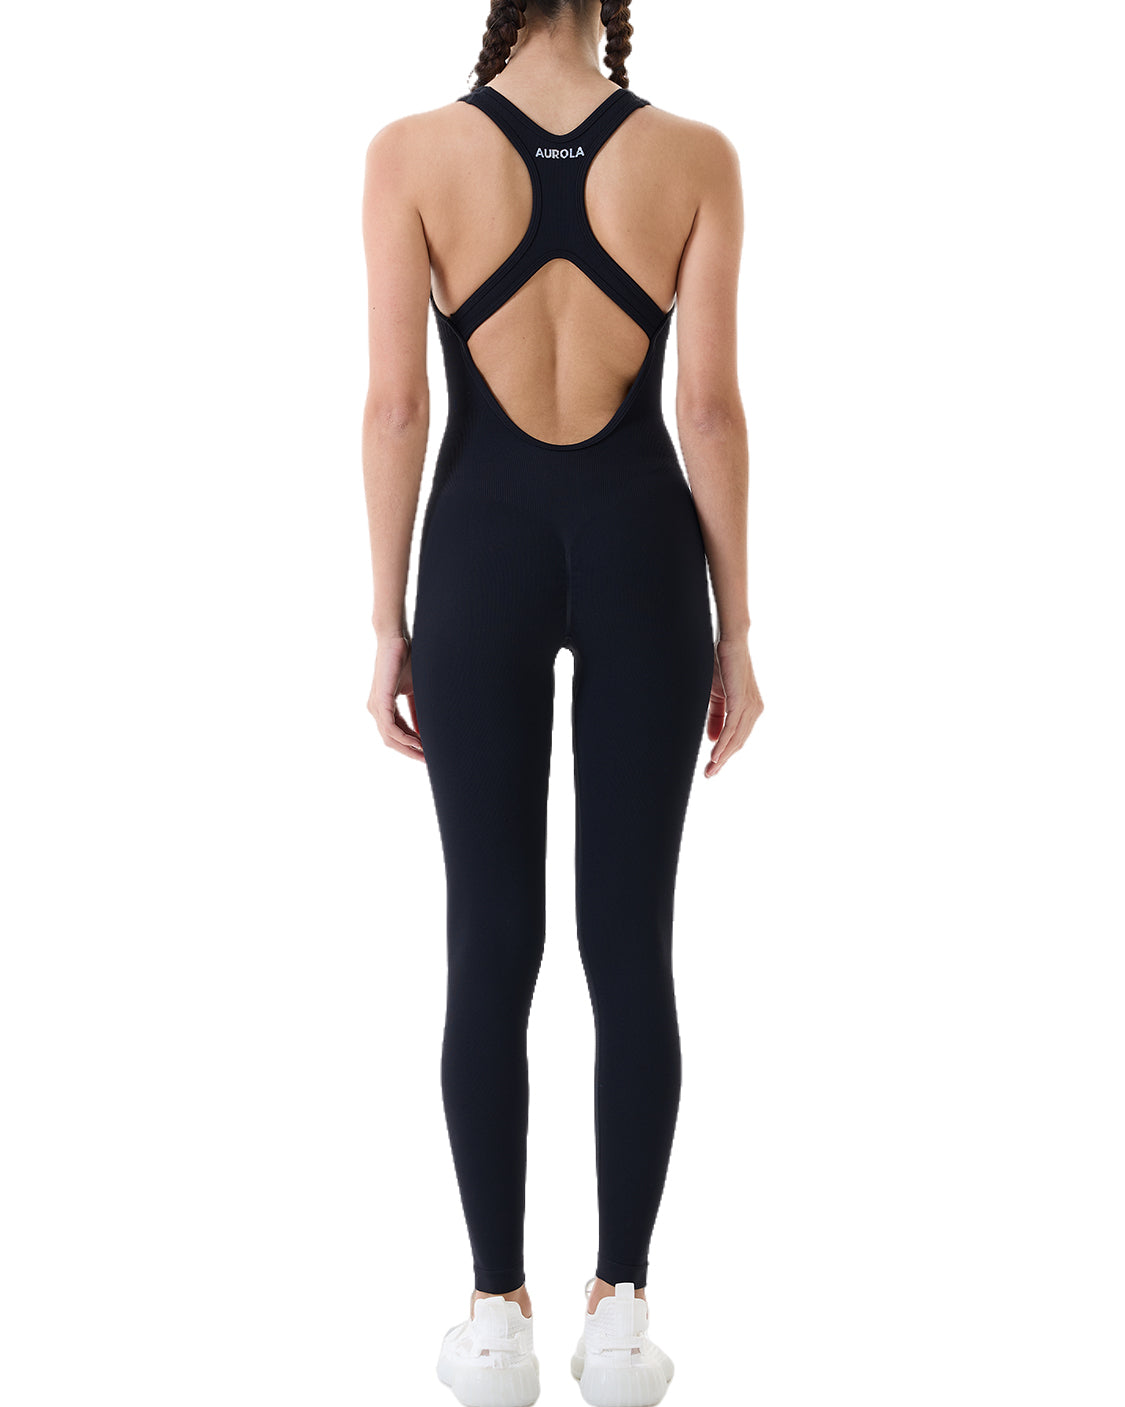 AUROLA Power Workout Jumpsuit for Women Yoga Gym Seamless One - Import It  All